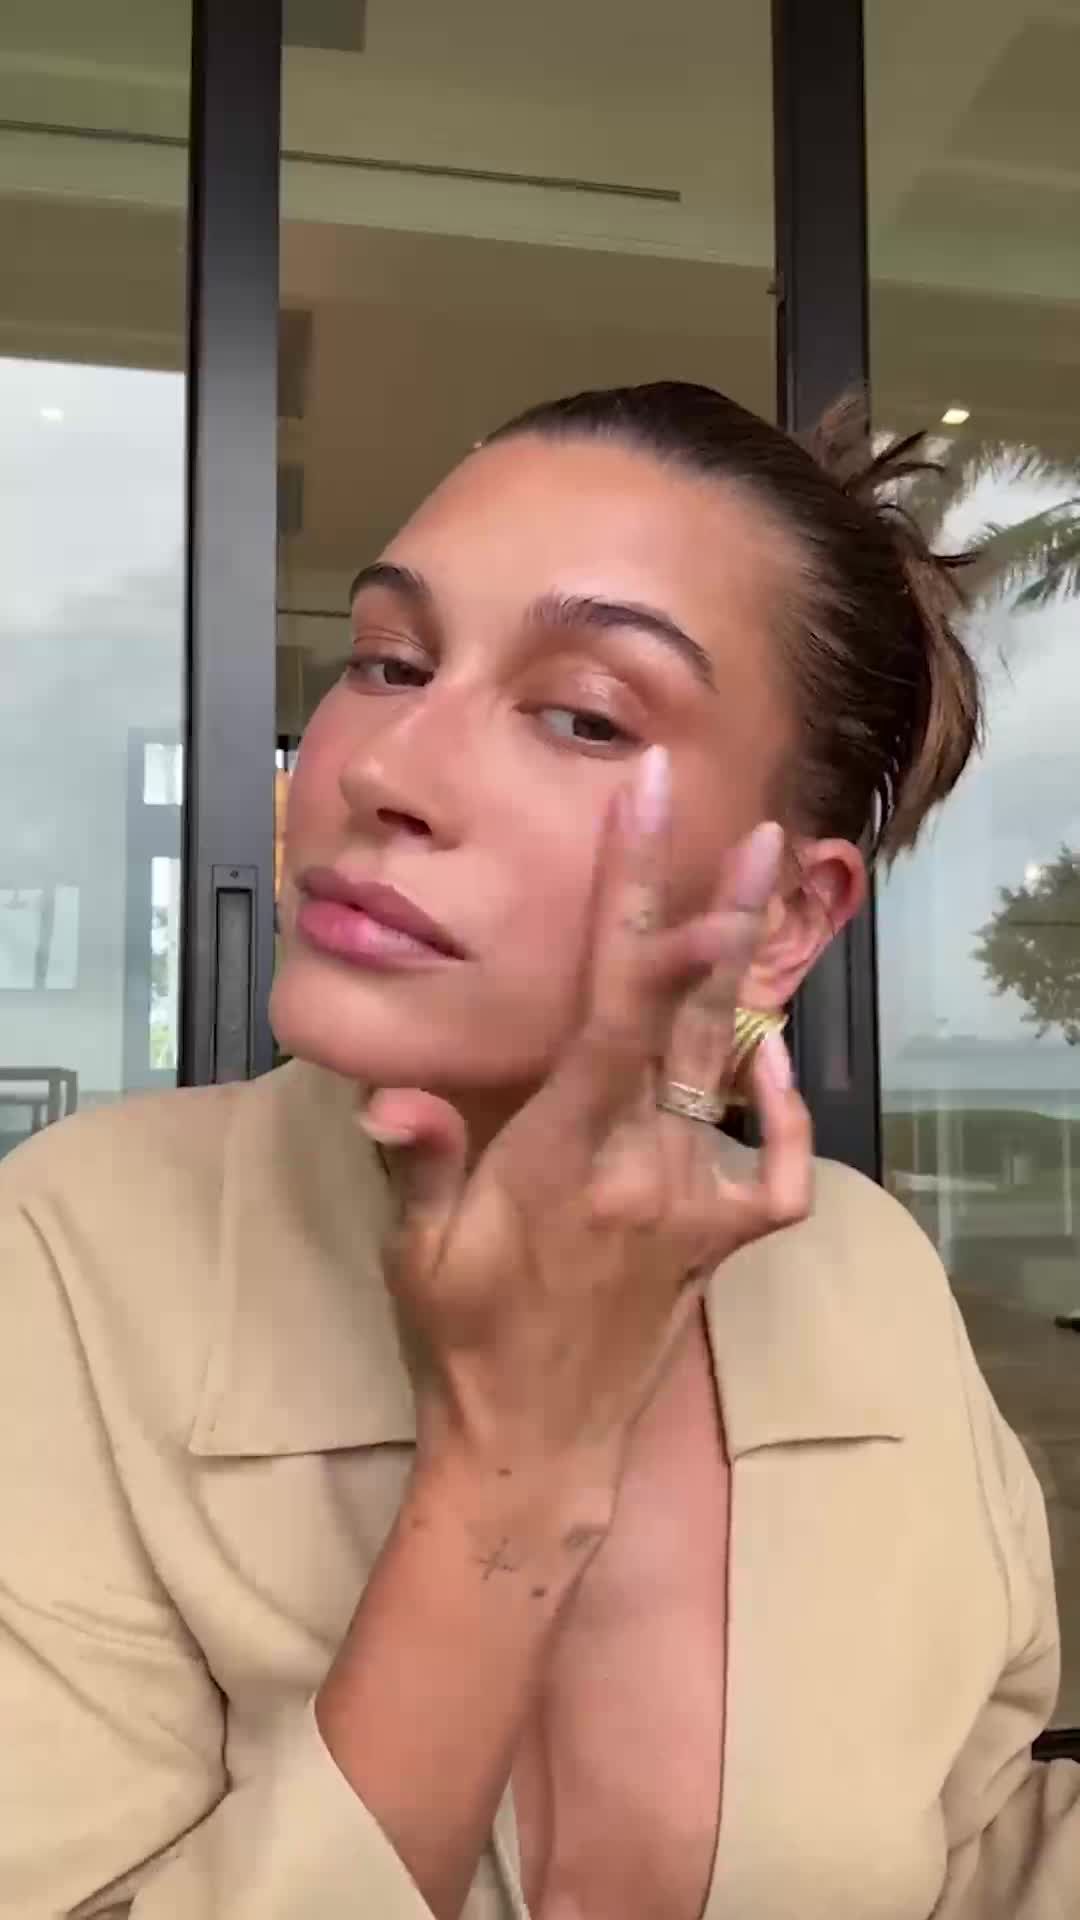 preview for Hailey Bieber shows off 'latte makeup' trend